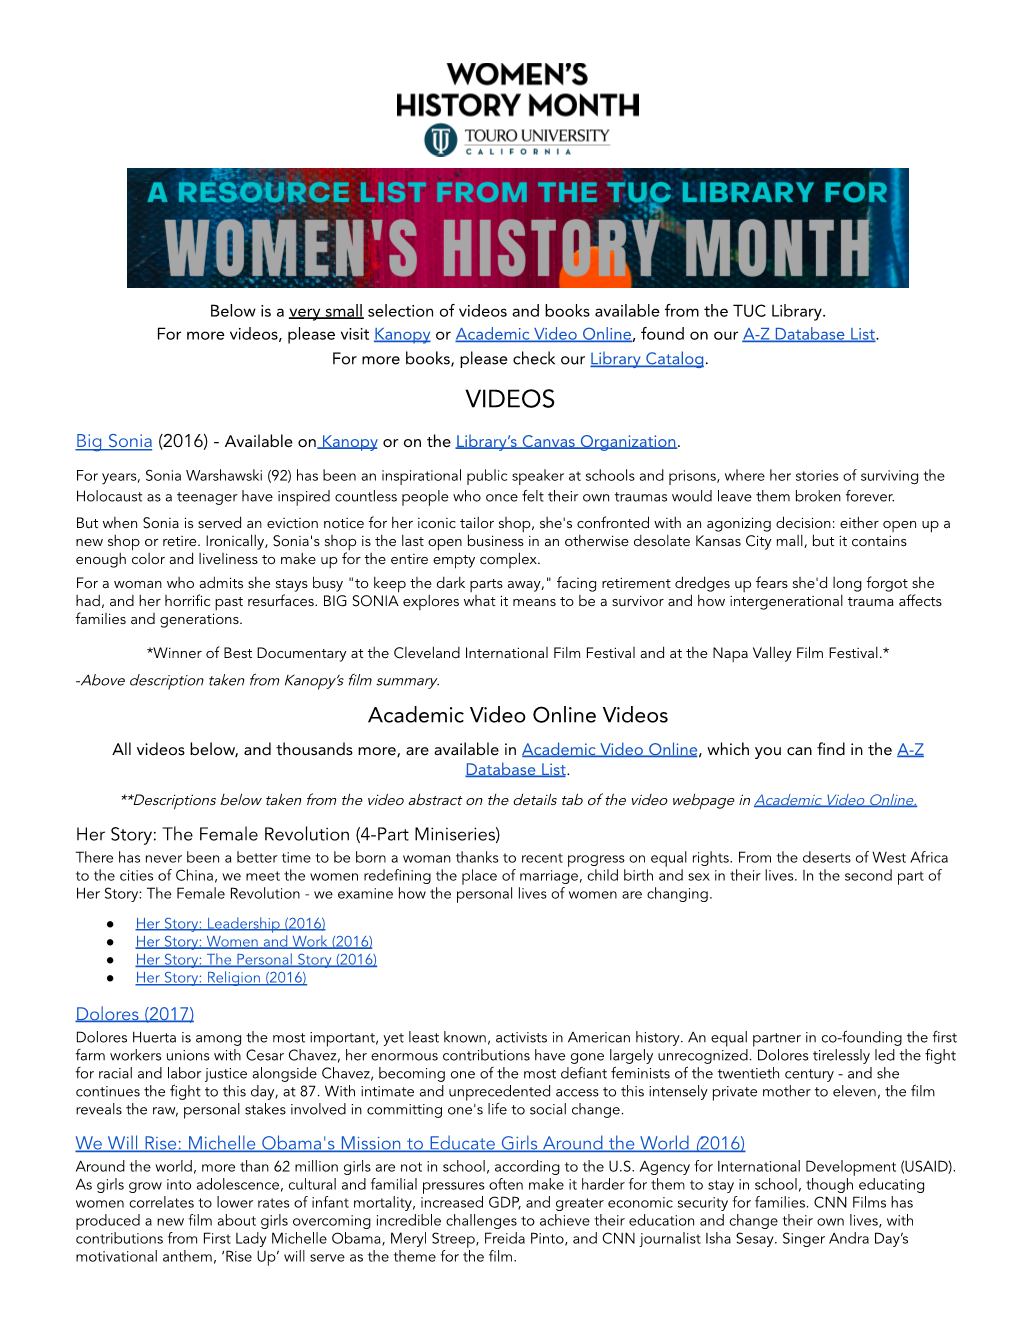 Women's History Month Resources